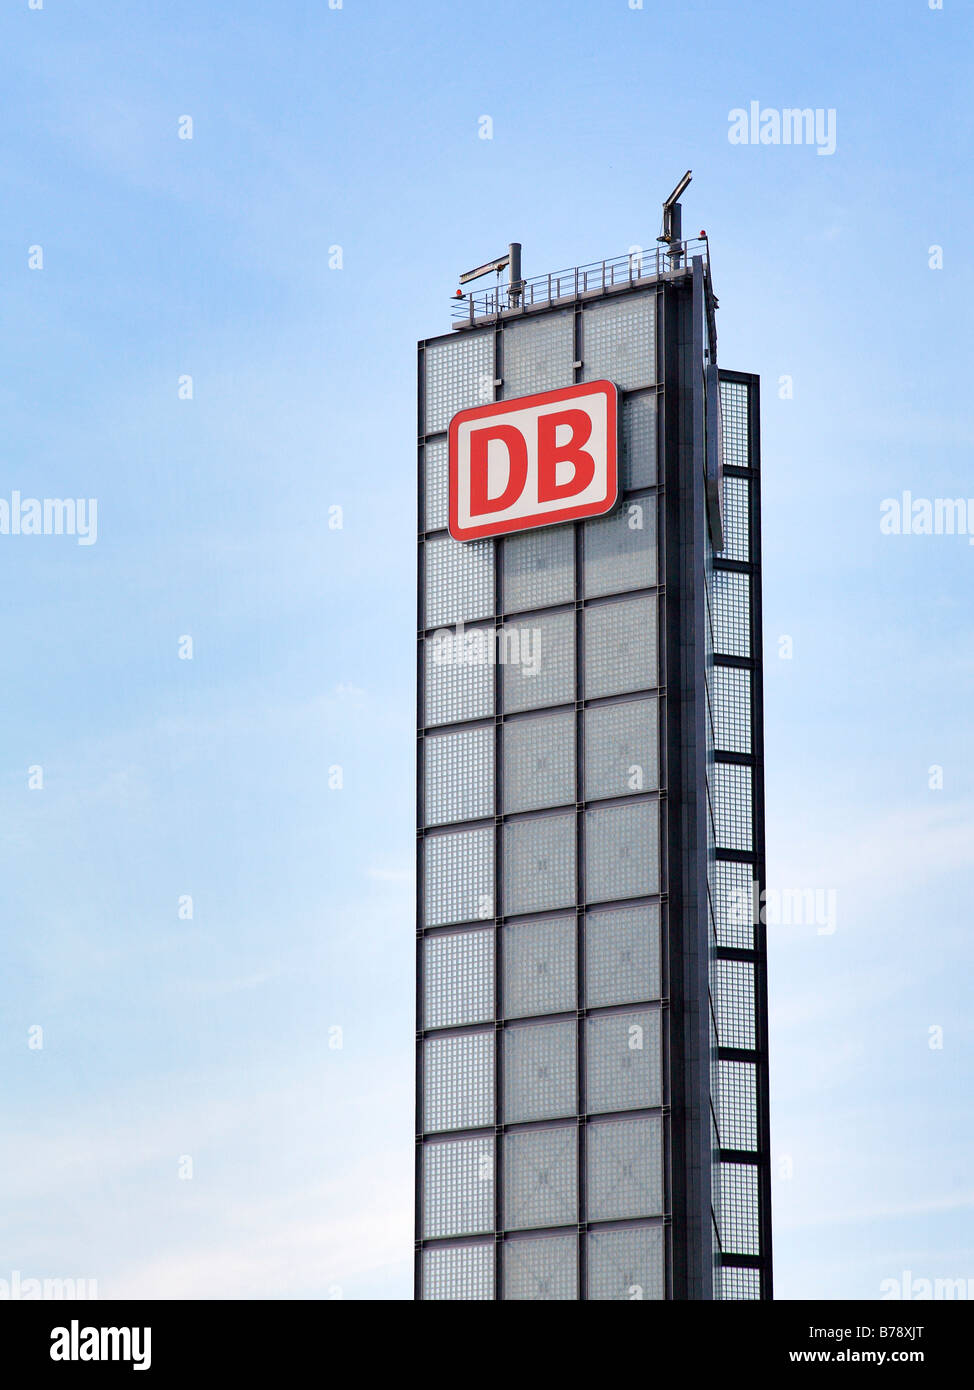 Tower with the DB or Deutsche Bahn or German Railways logo, Berliner Hauptbahnhof or Berlin Central Train Station, southern ent Stock Photo